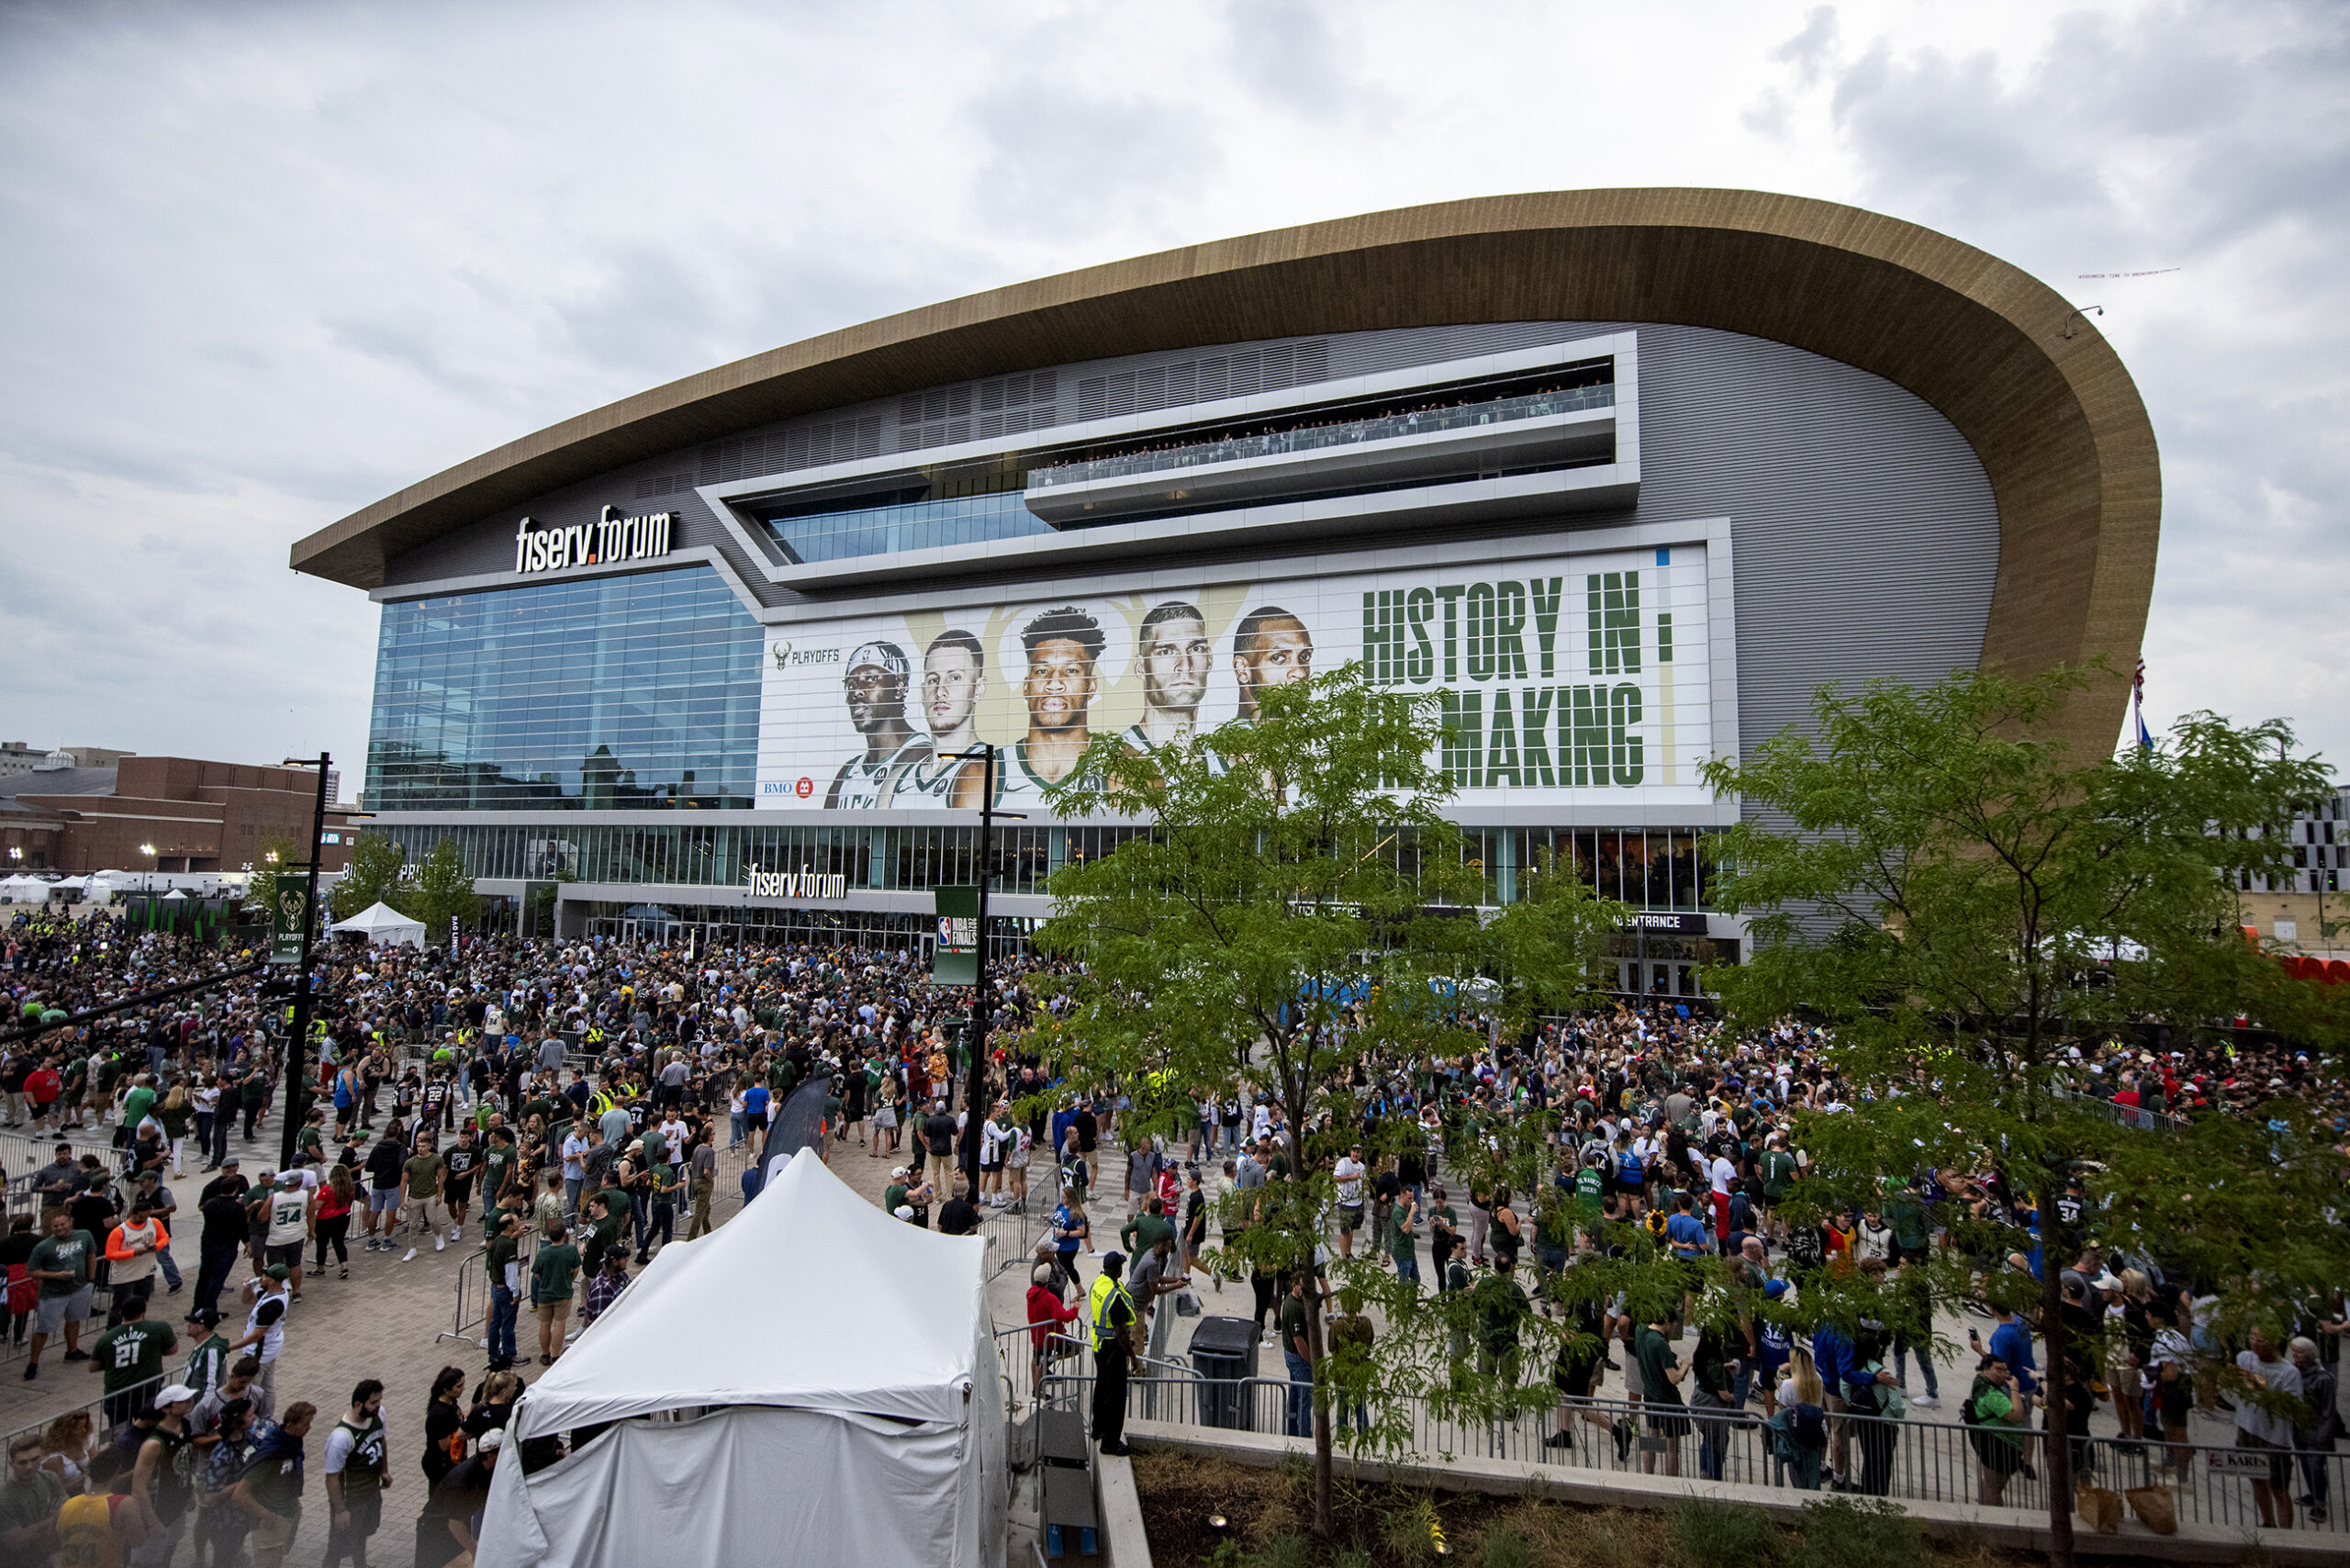 A sea of fans can be seen in front of the FIserv Forum.